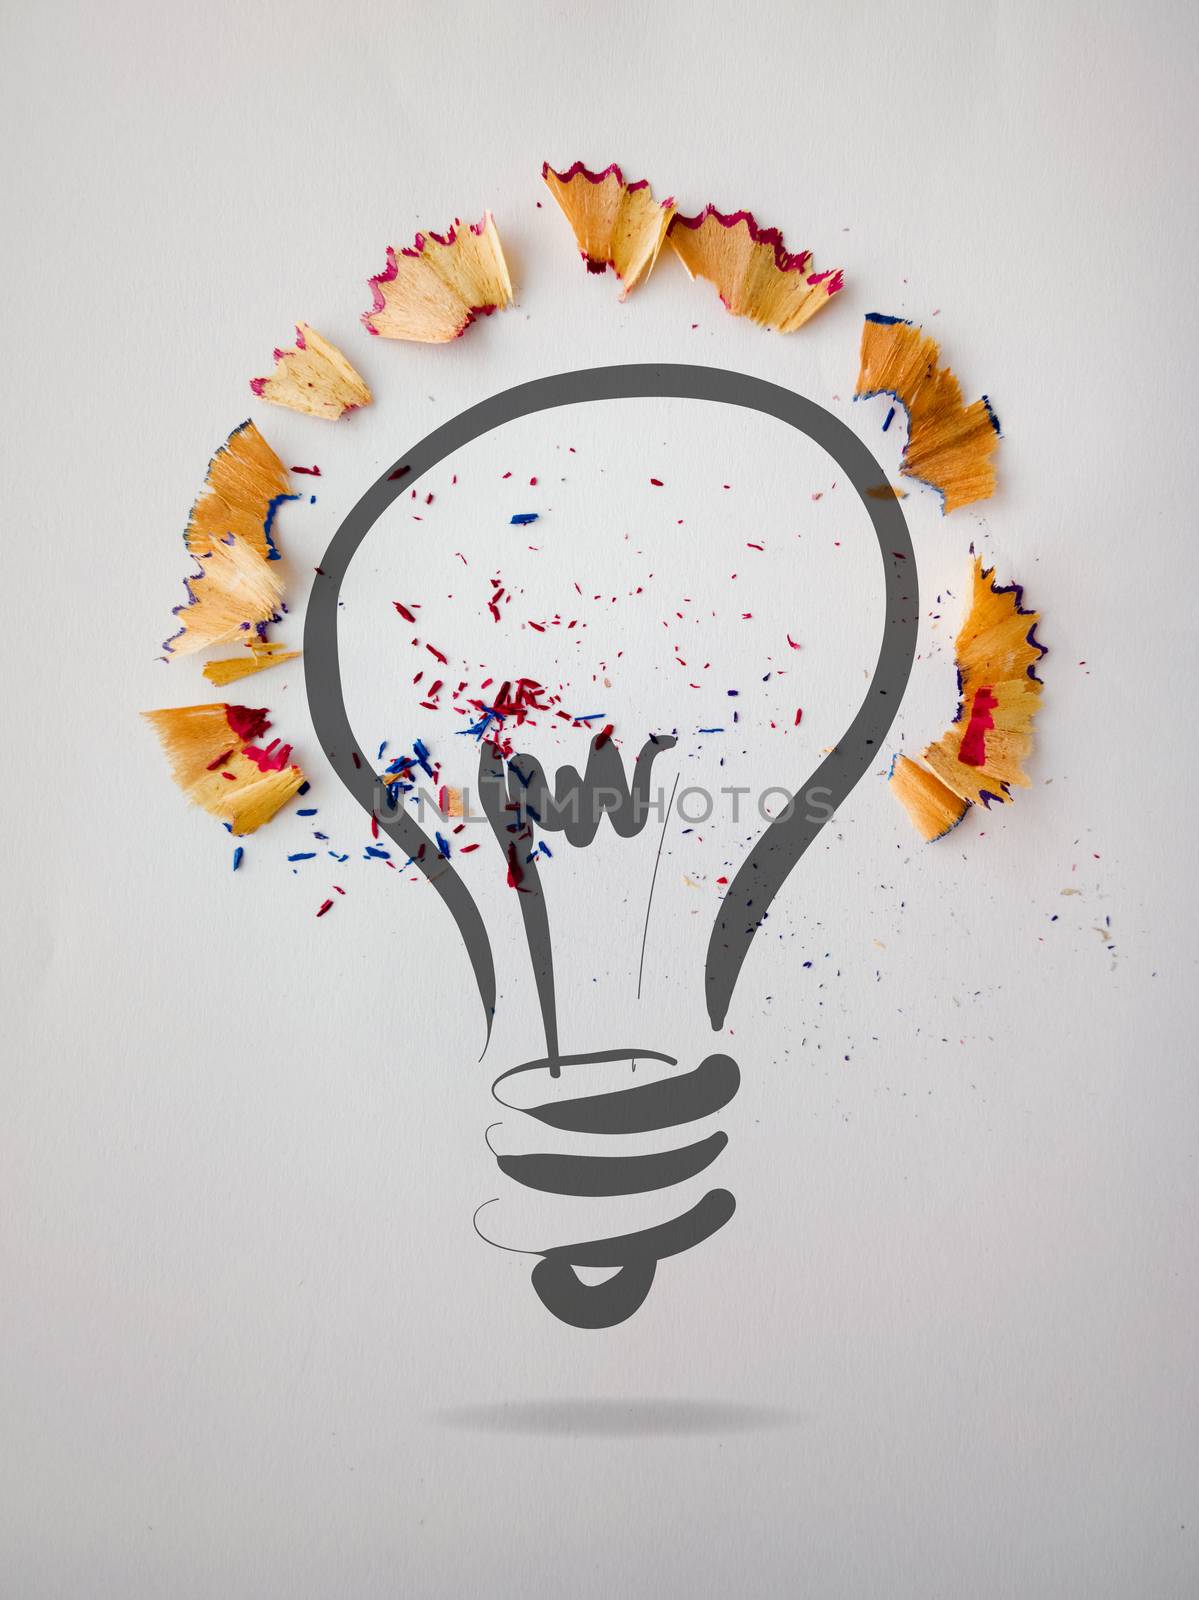 hand drawn light bulb with pencil saw dust on paper background a by everythingpossible